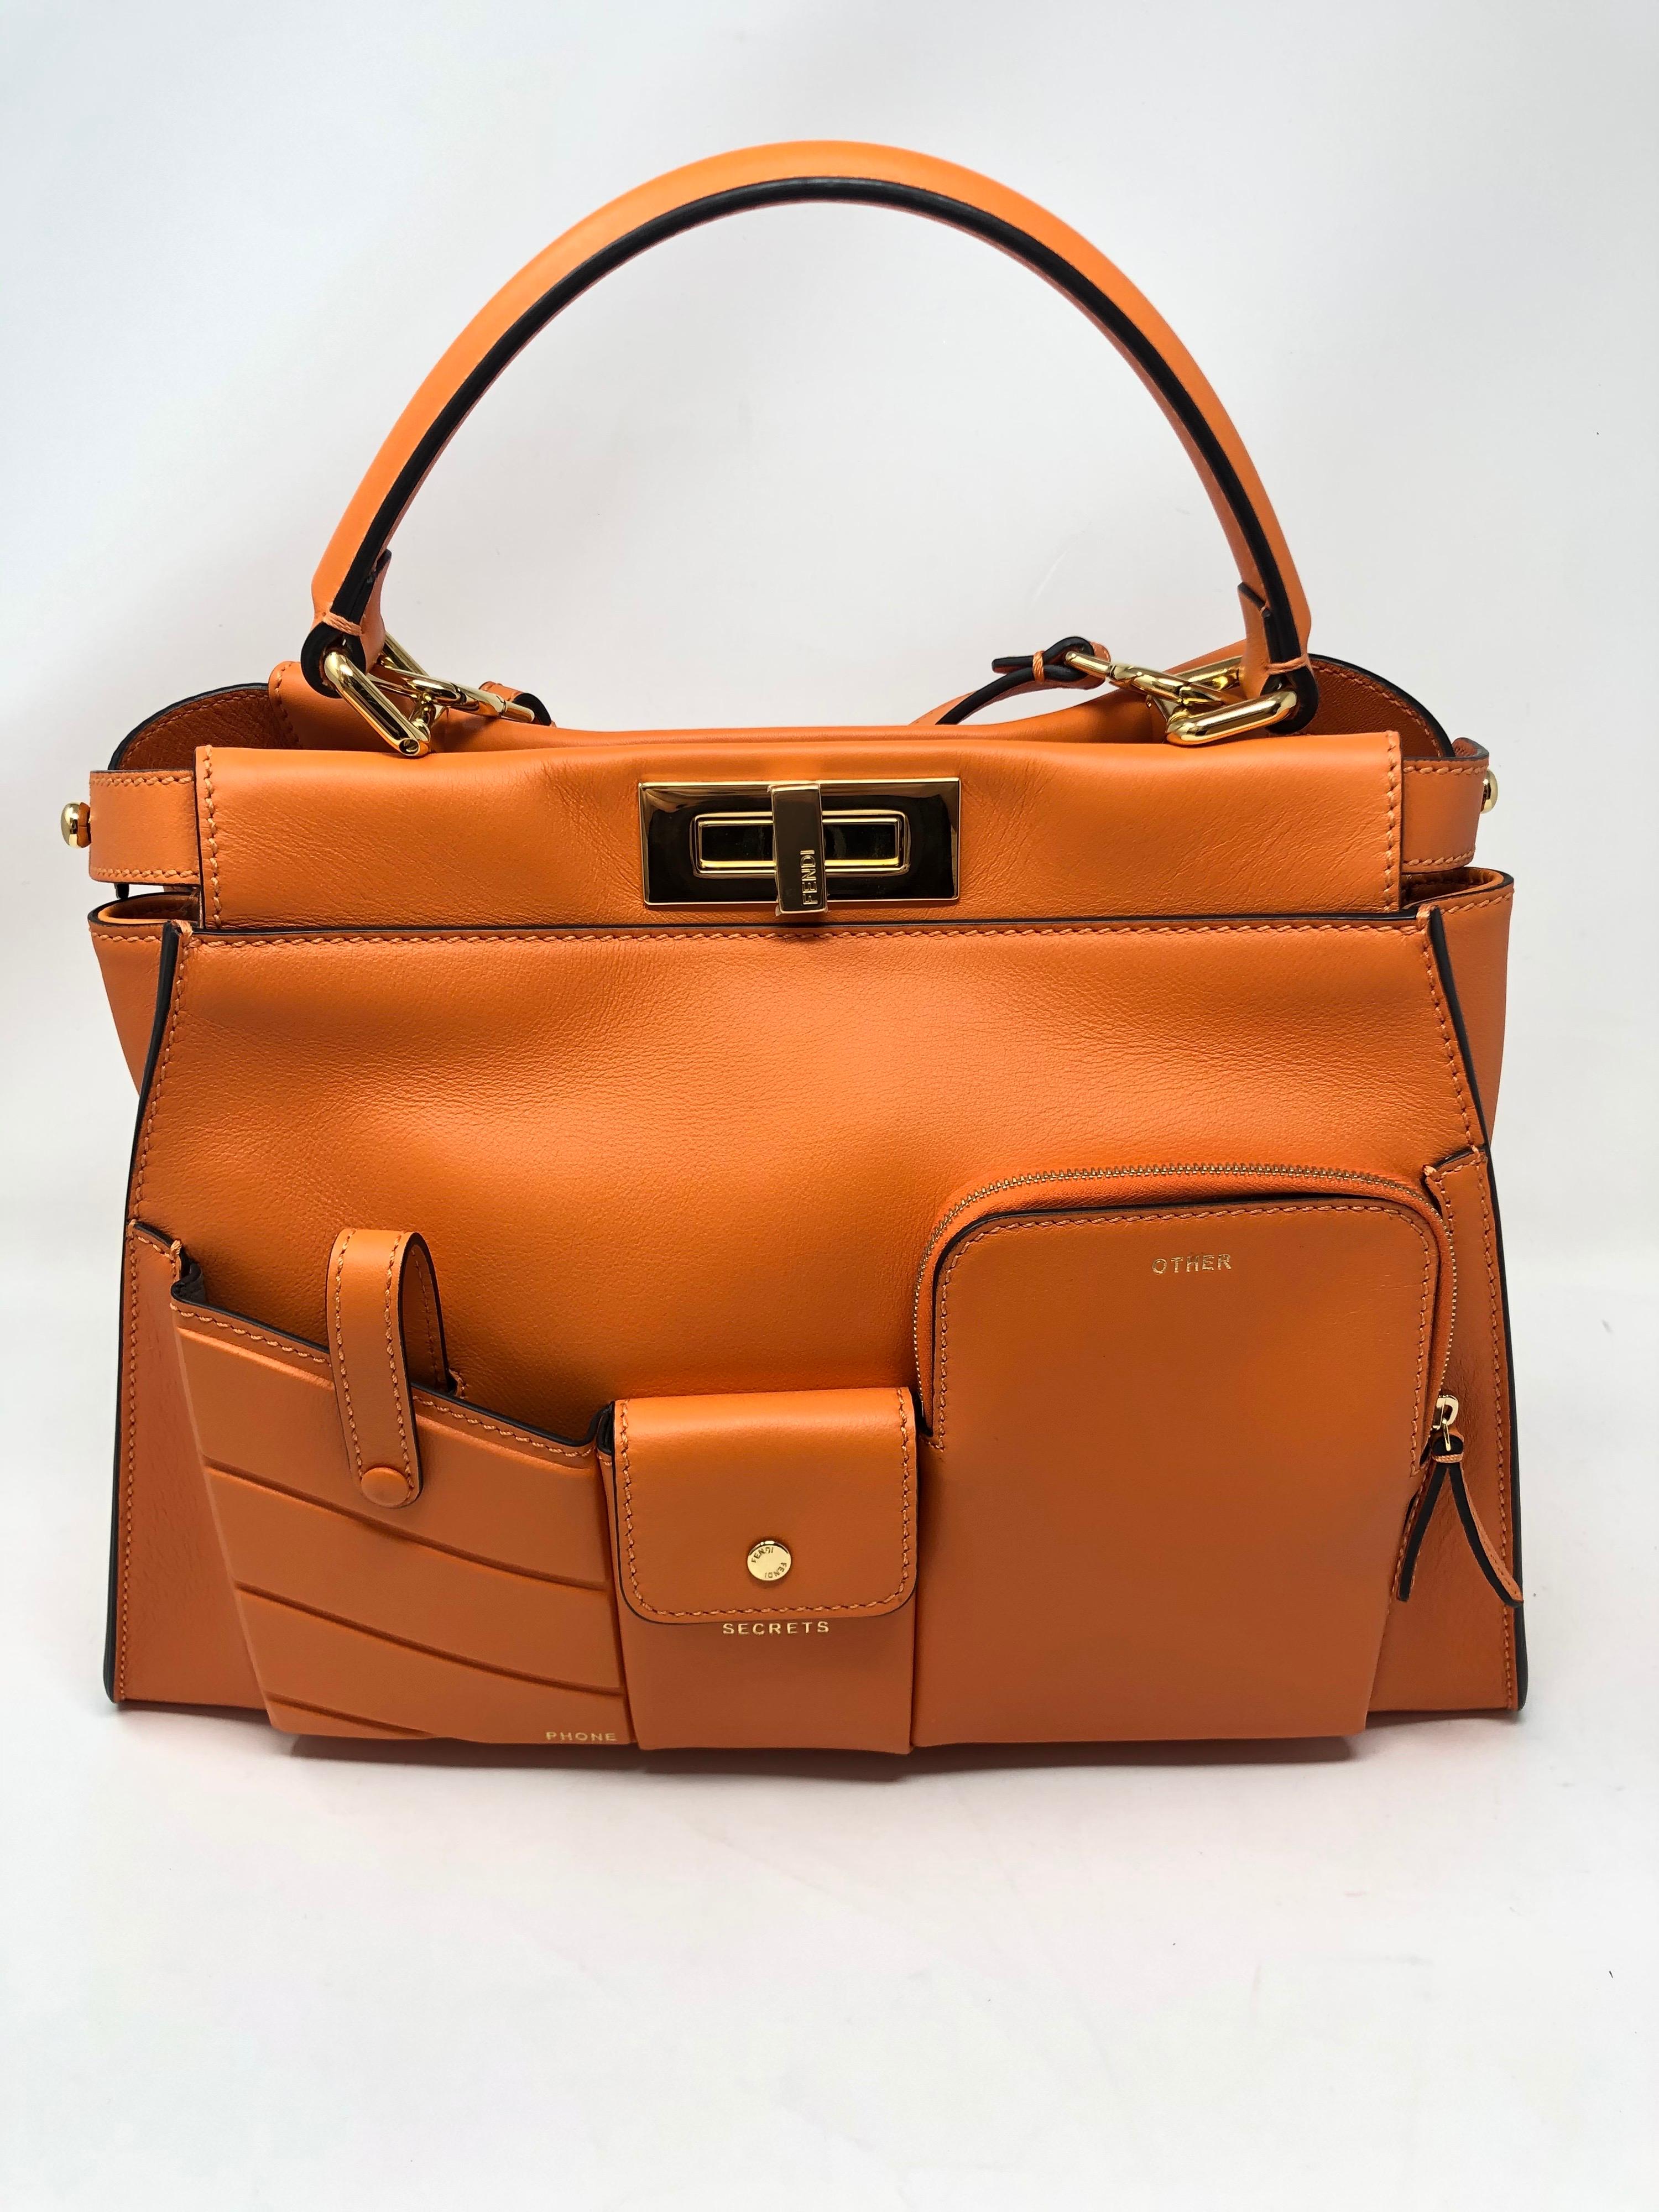 Fendi Orange Peekaboo Bag. Brand new condition. Never used. Plastic is still on hardware. Retail $6,000. Being offered at half the retail price. A unique style bag by Fendi. Would make a great gift. Guaranteed authentic. 